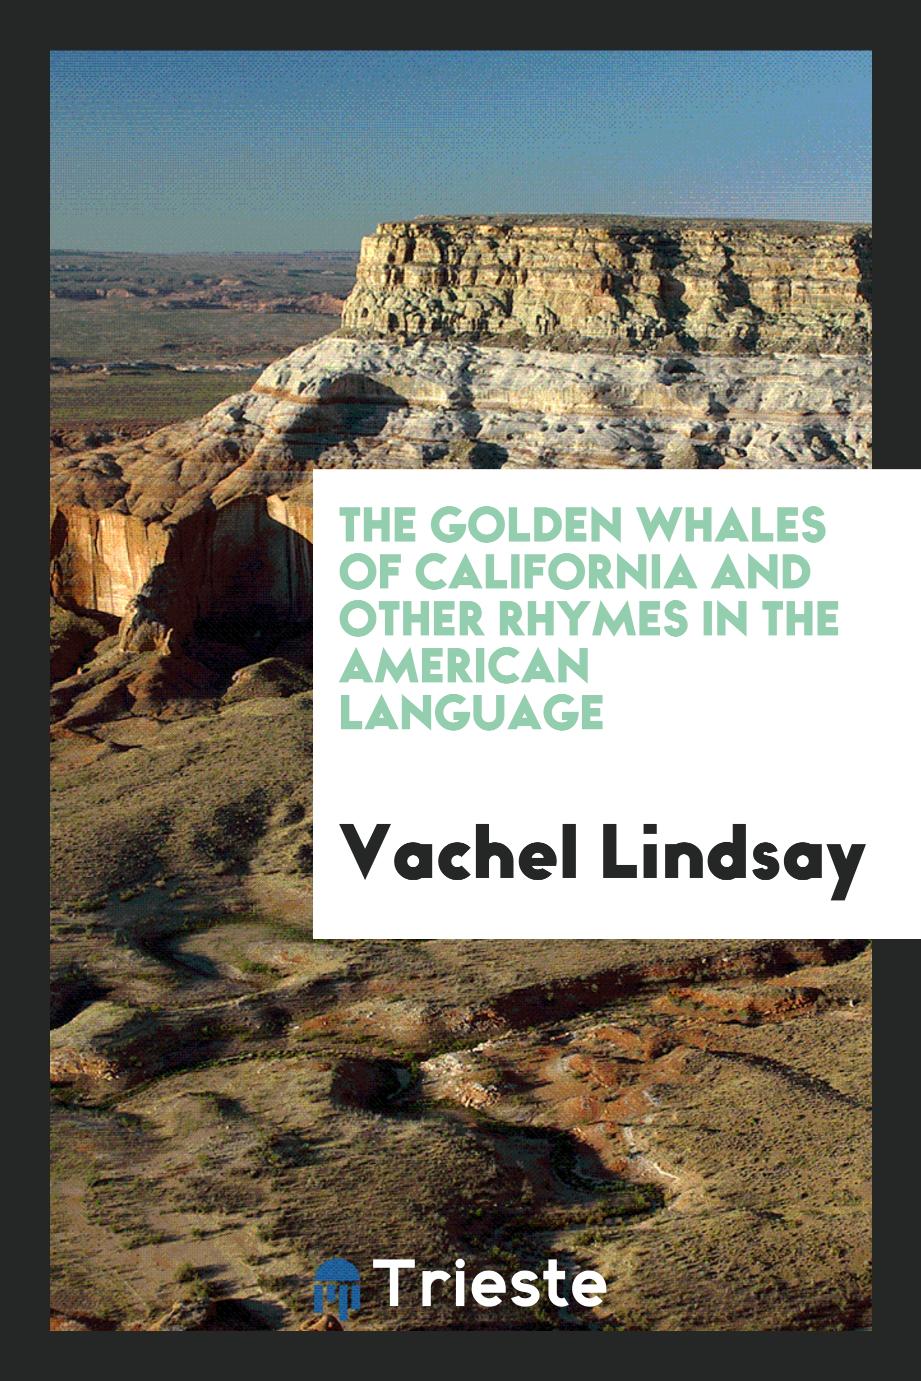 The golden whales of California and other rhymes in the American language